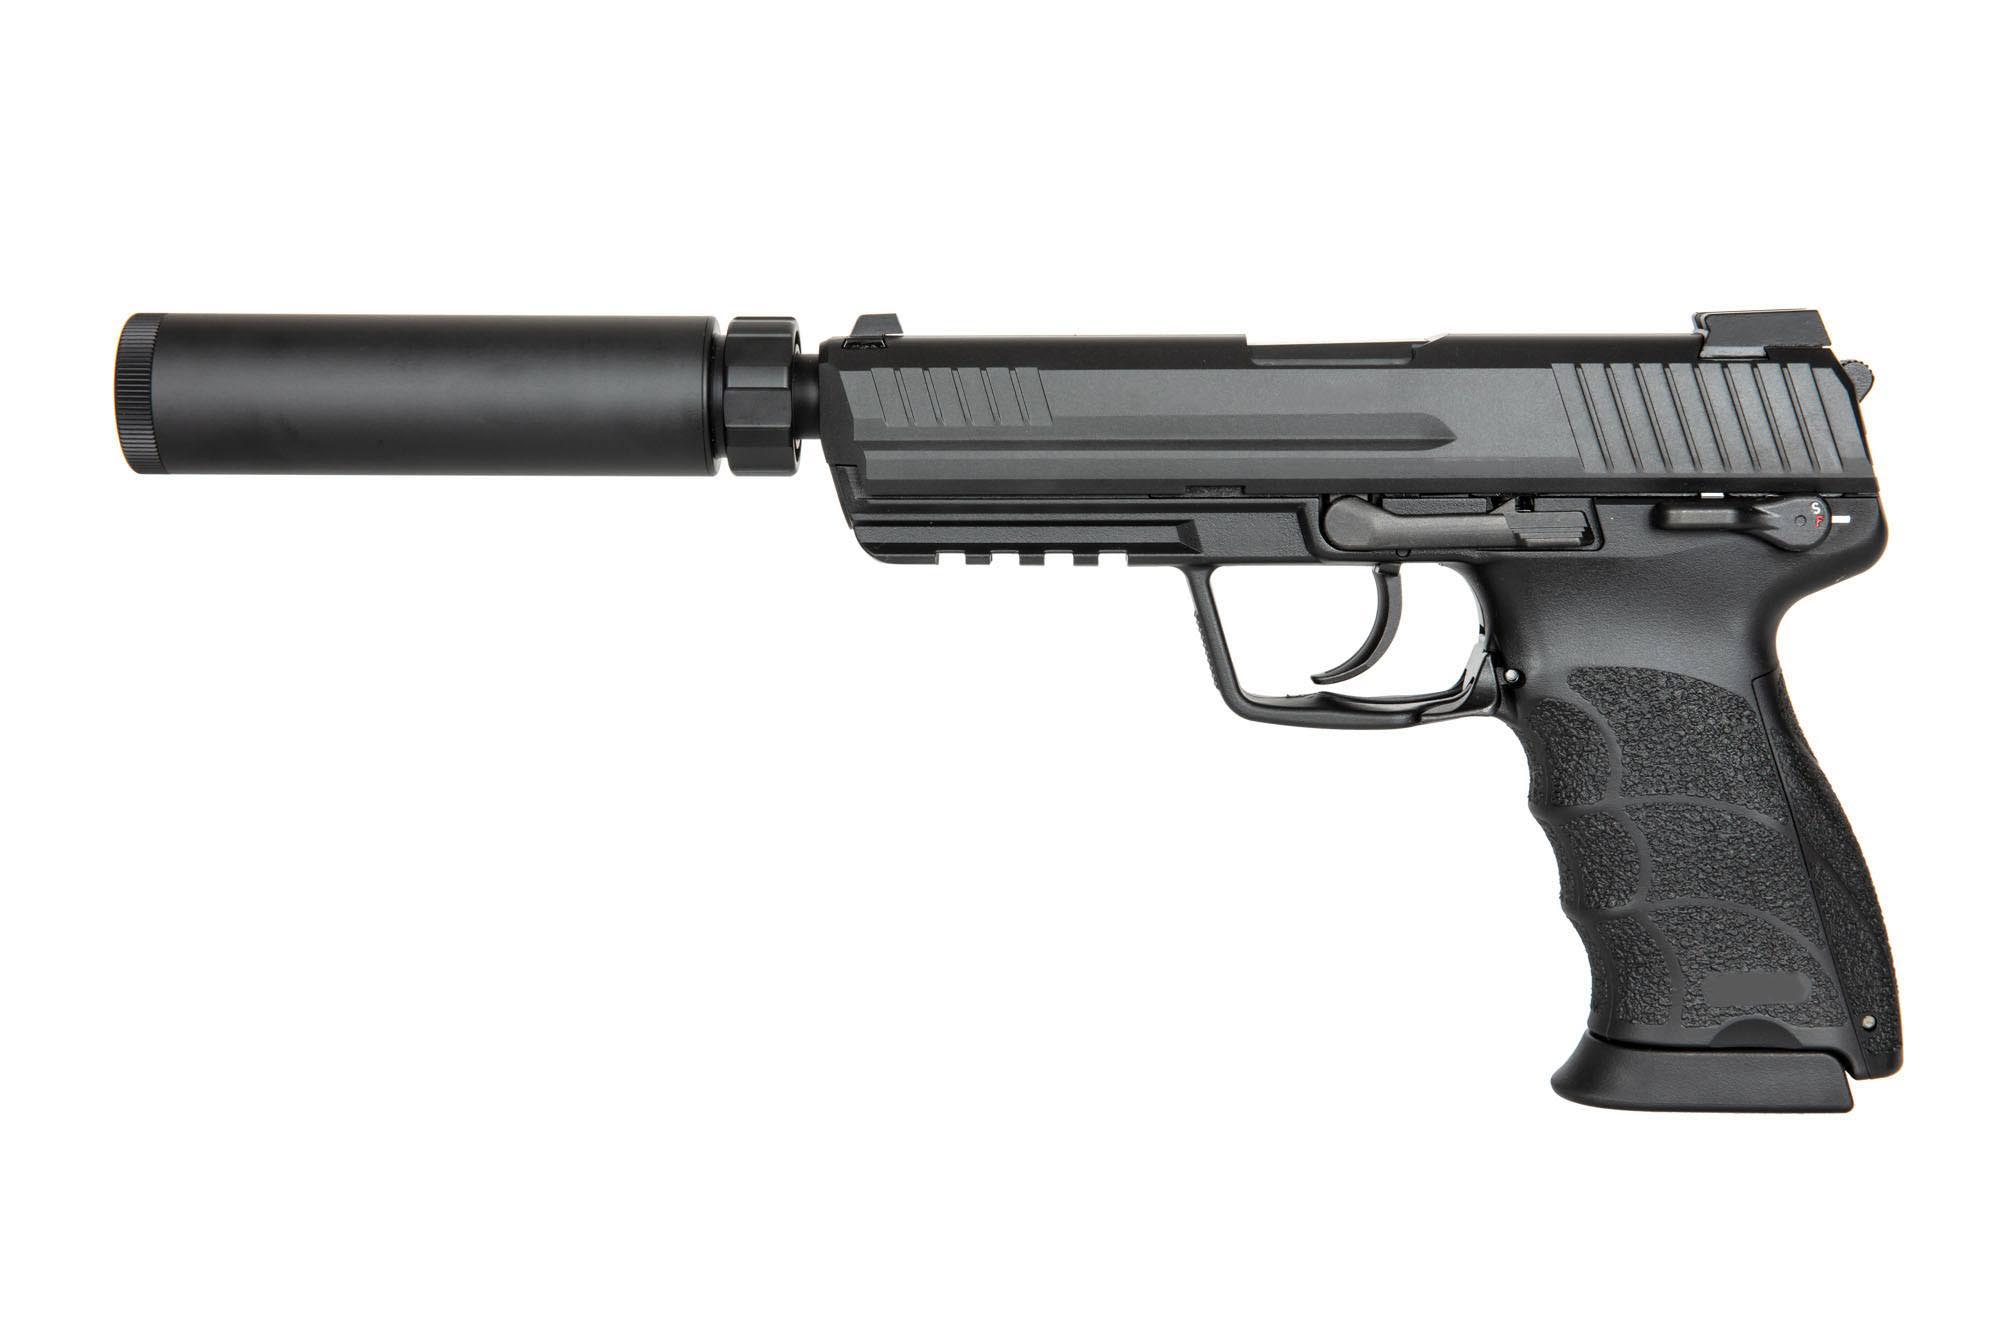 TM45 Tactical Pistol Replica with Silencer - Black